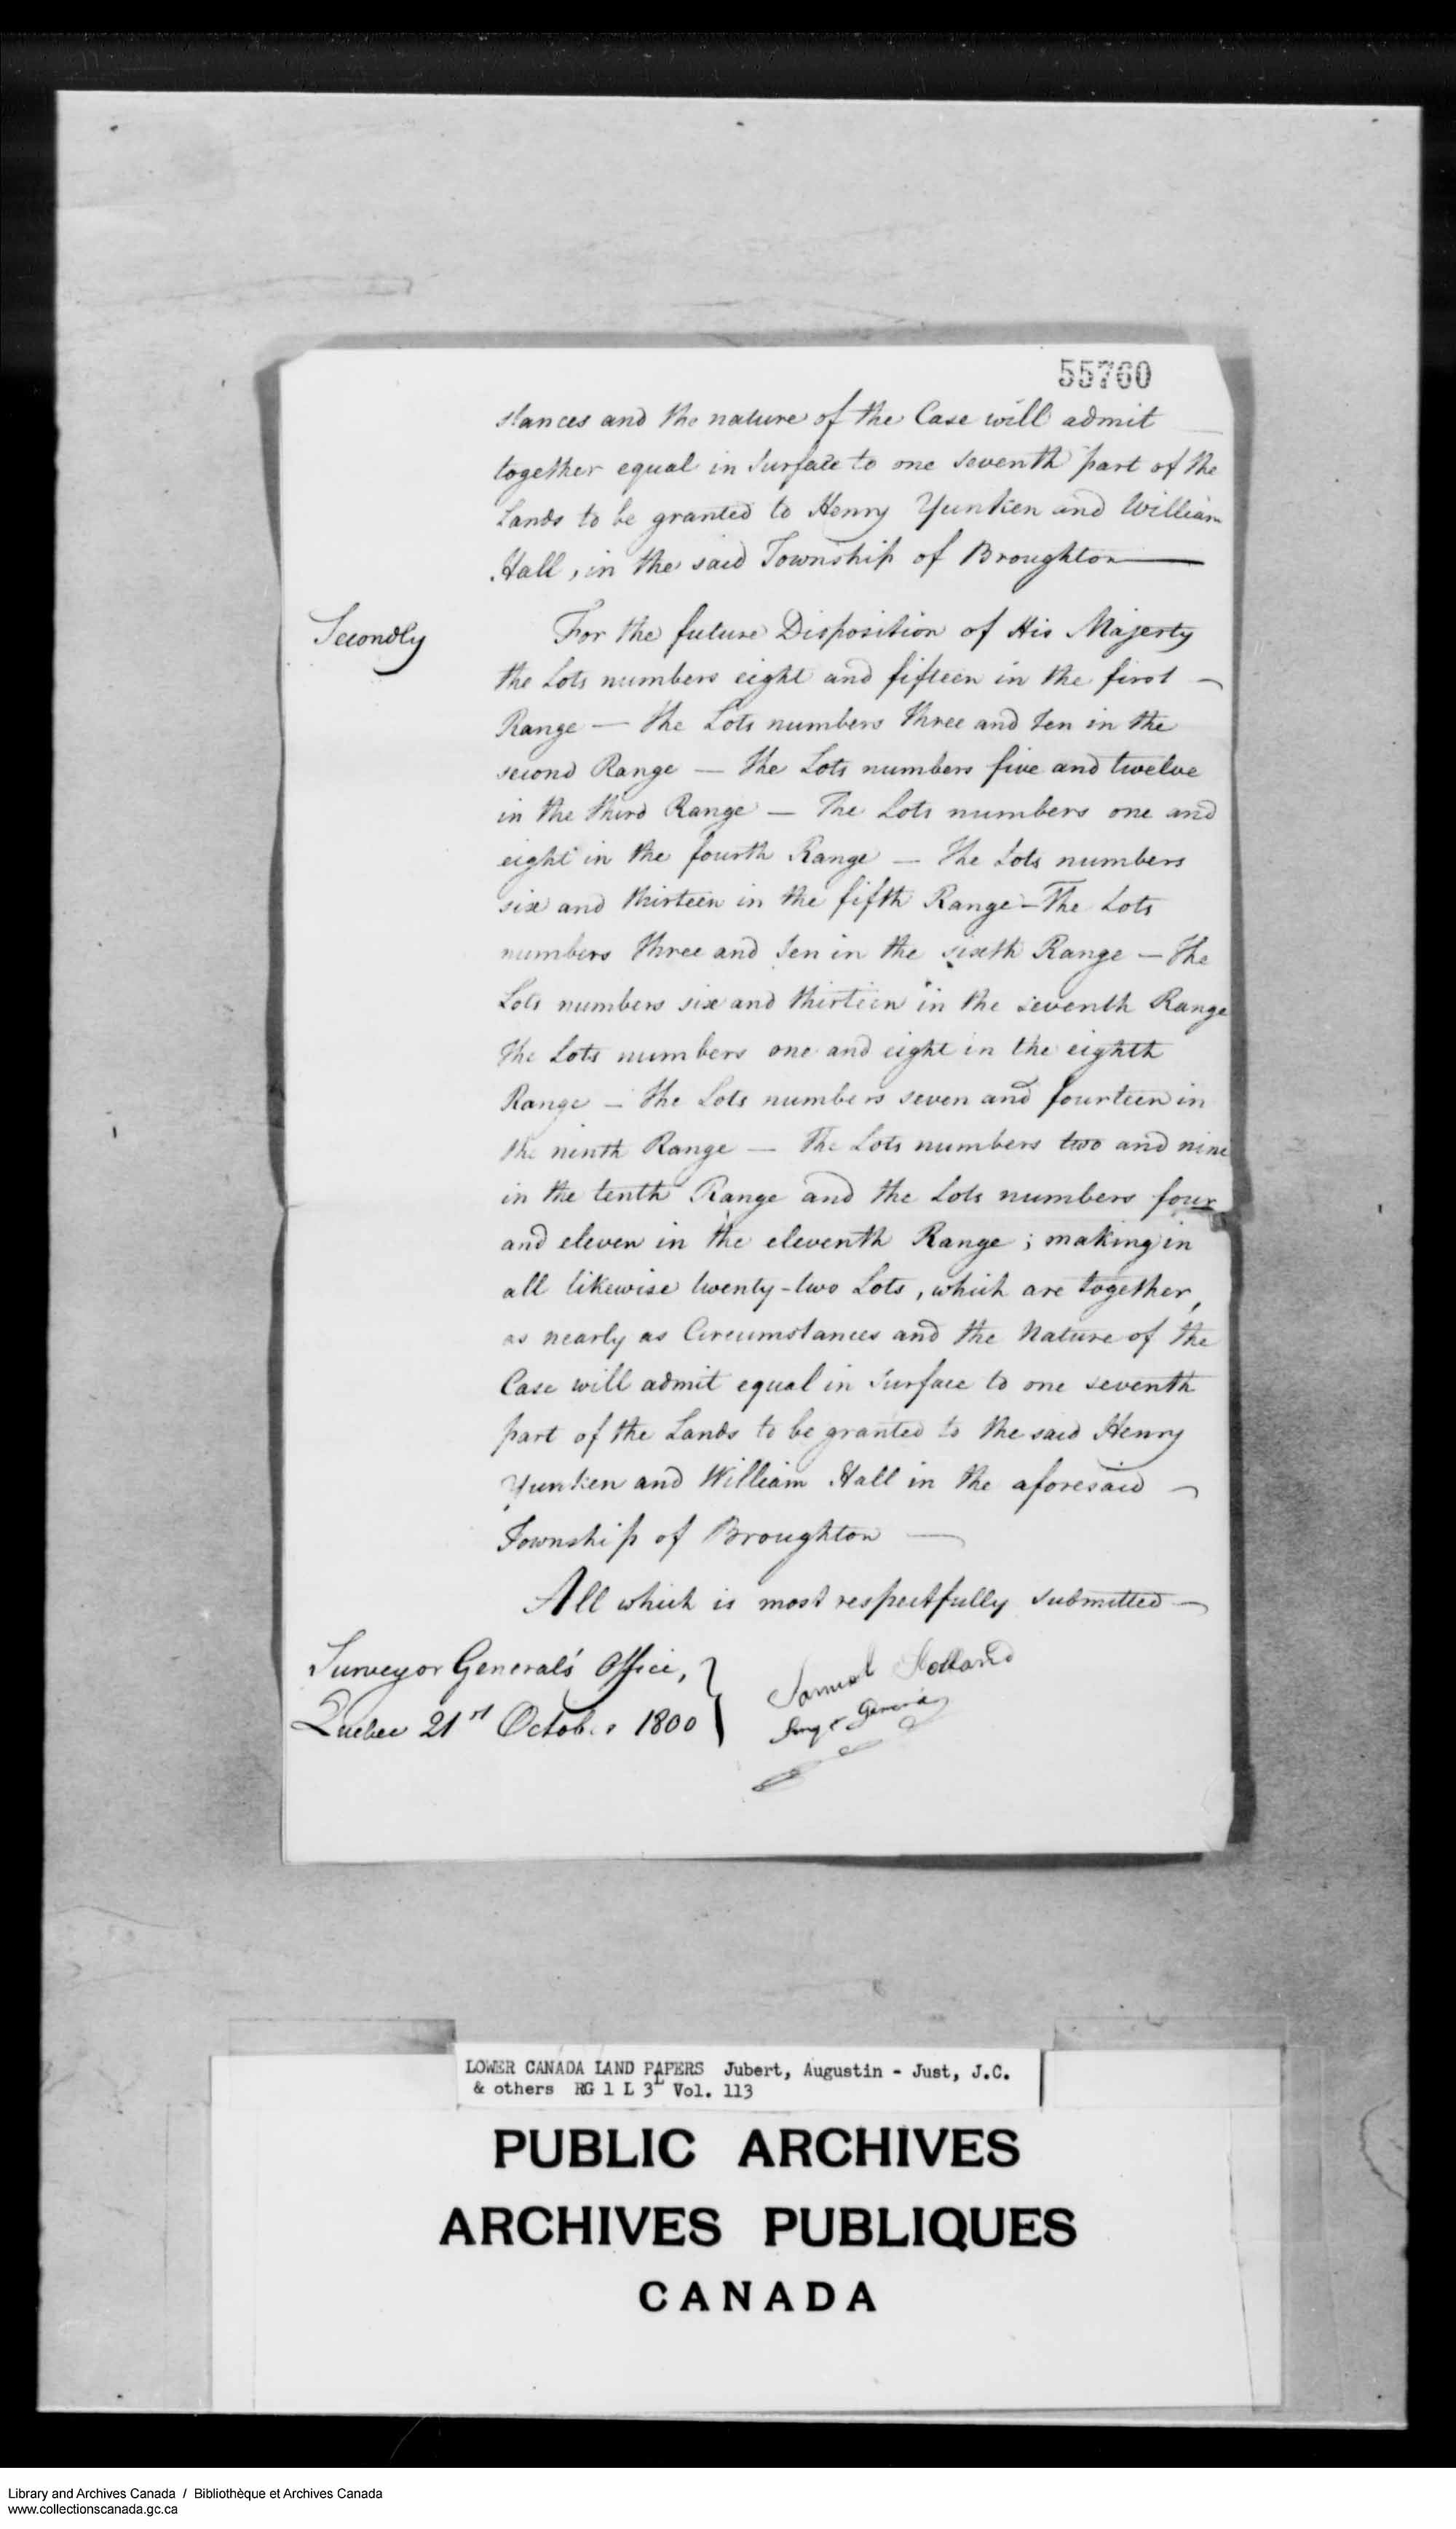 Digitized page of  for Image No.: e008700248